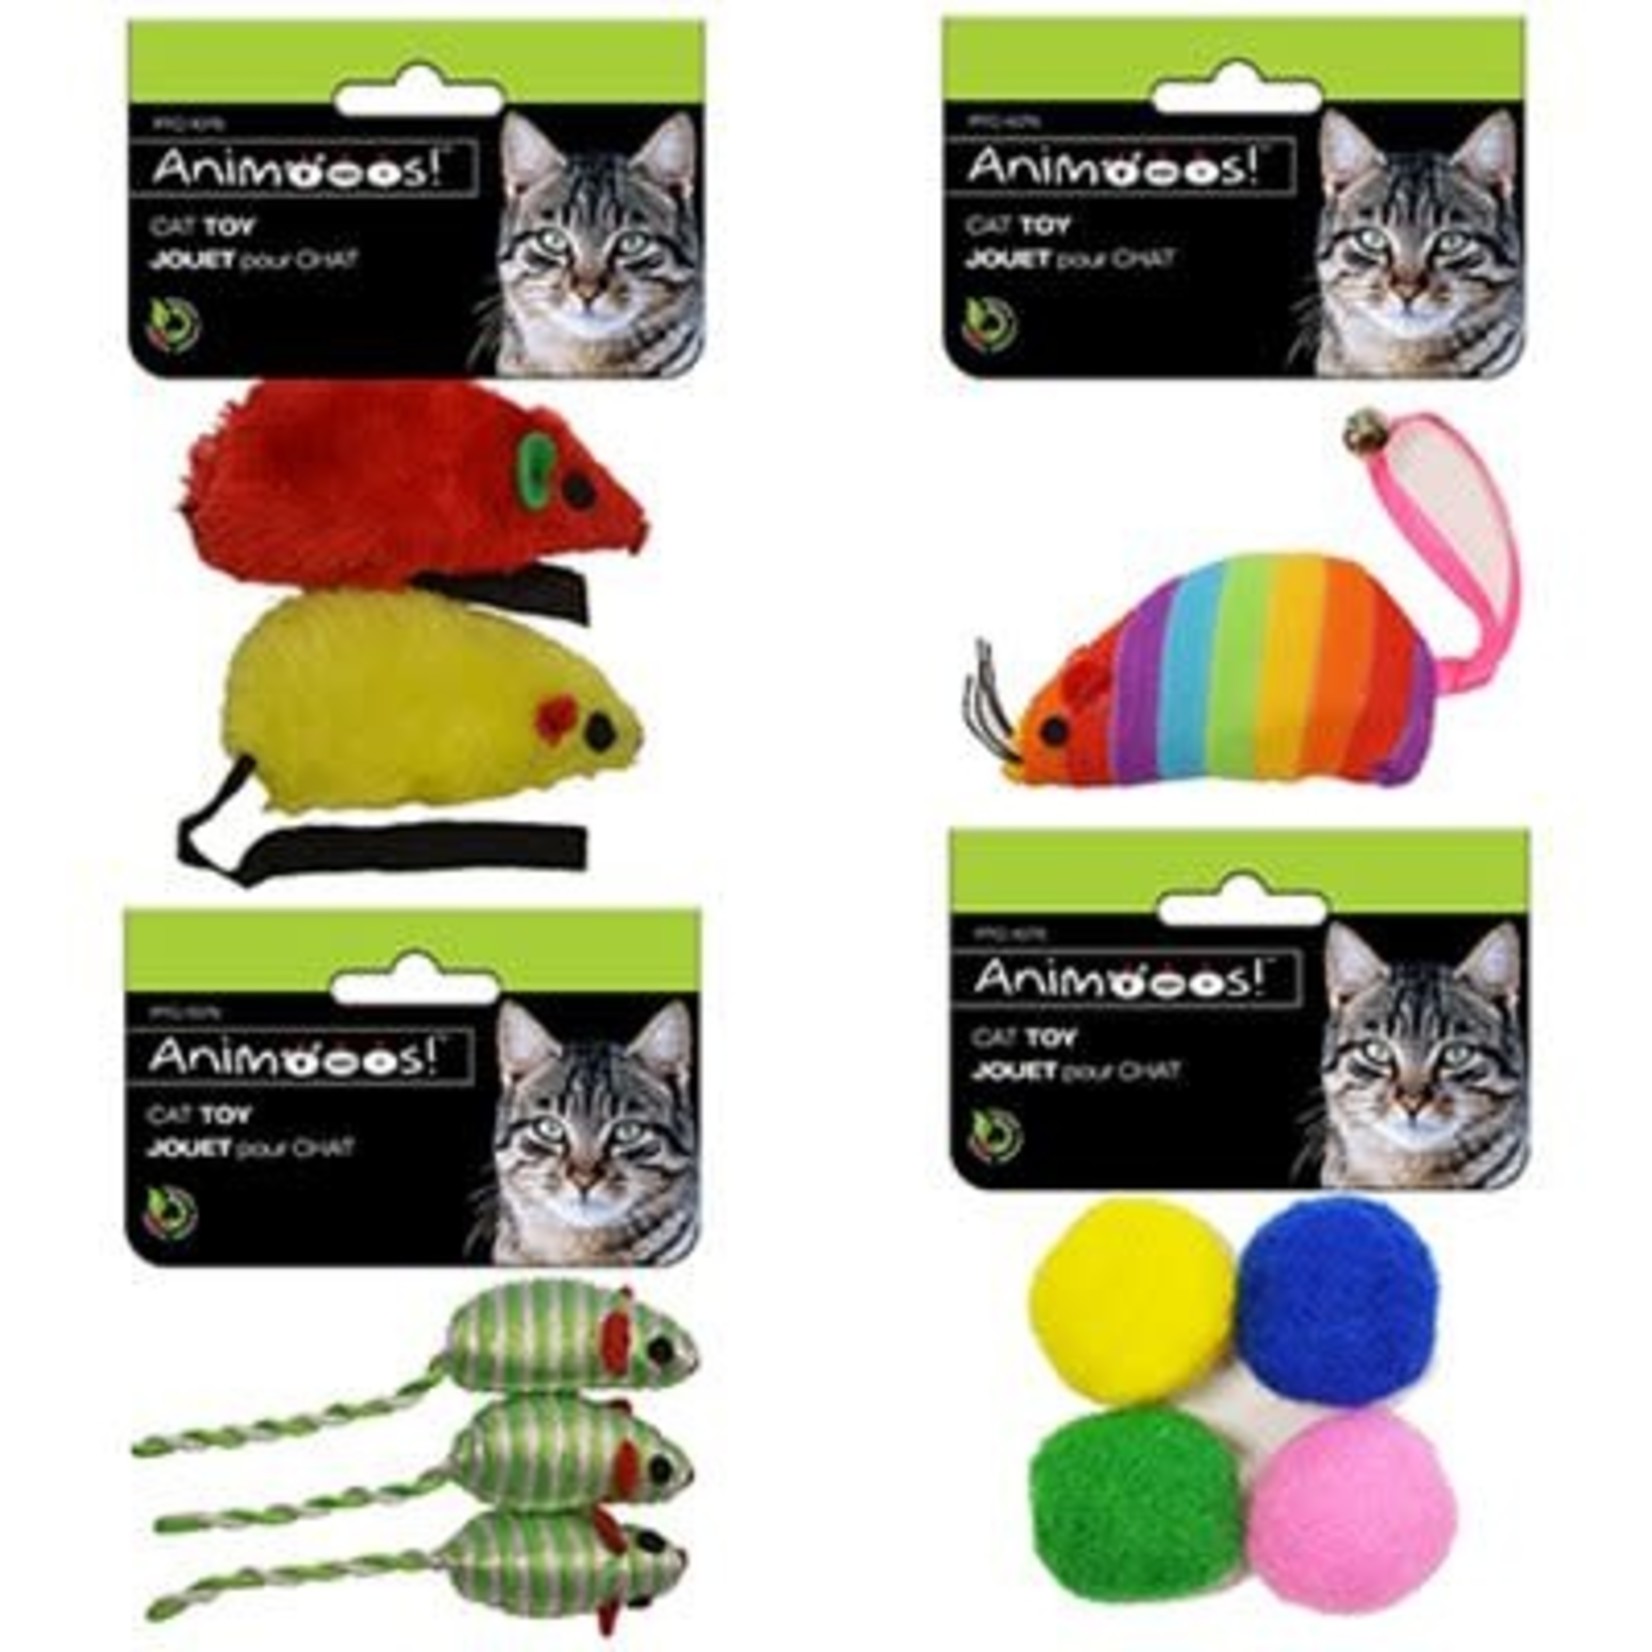 CAT TOYS - 4 ASSORTED